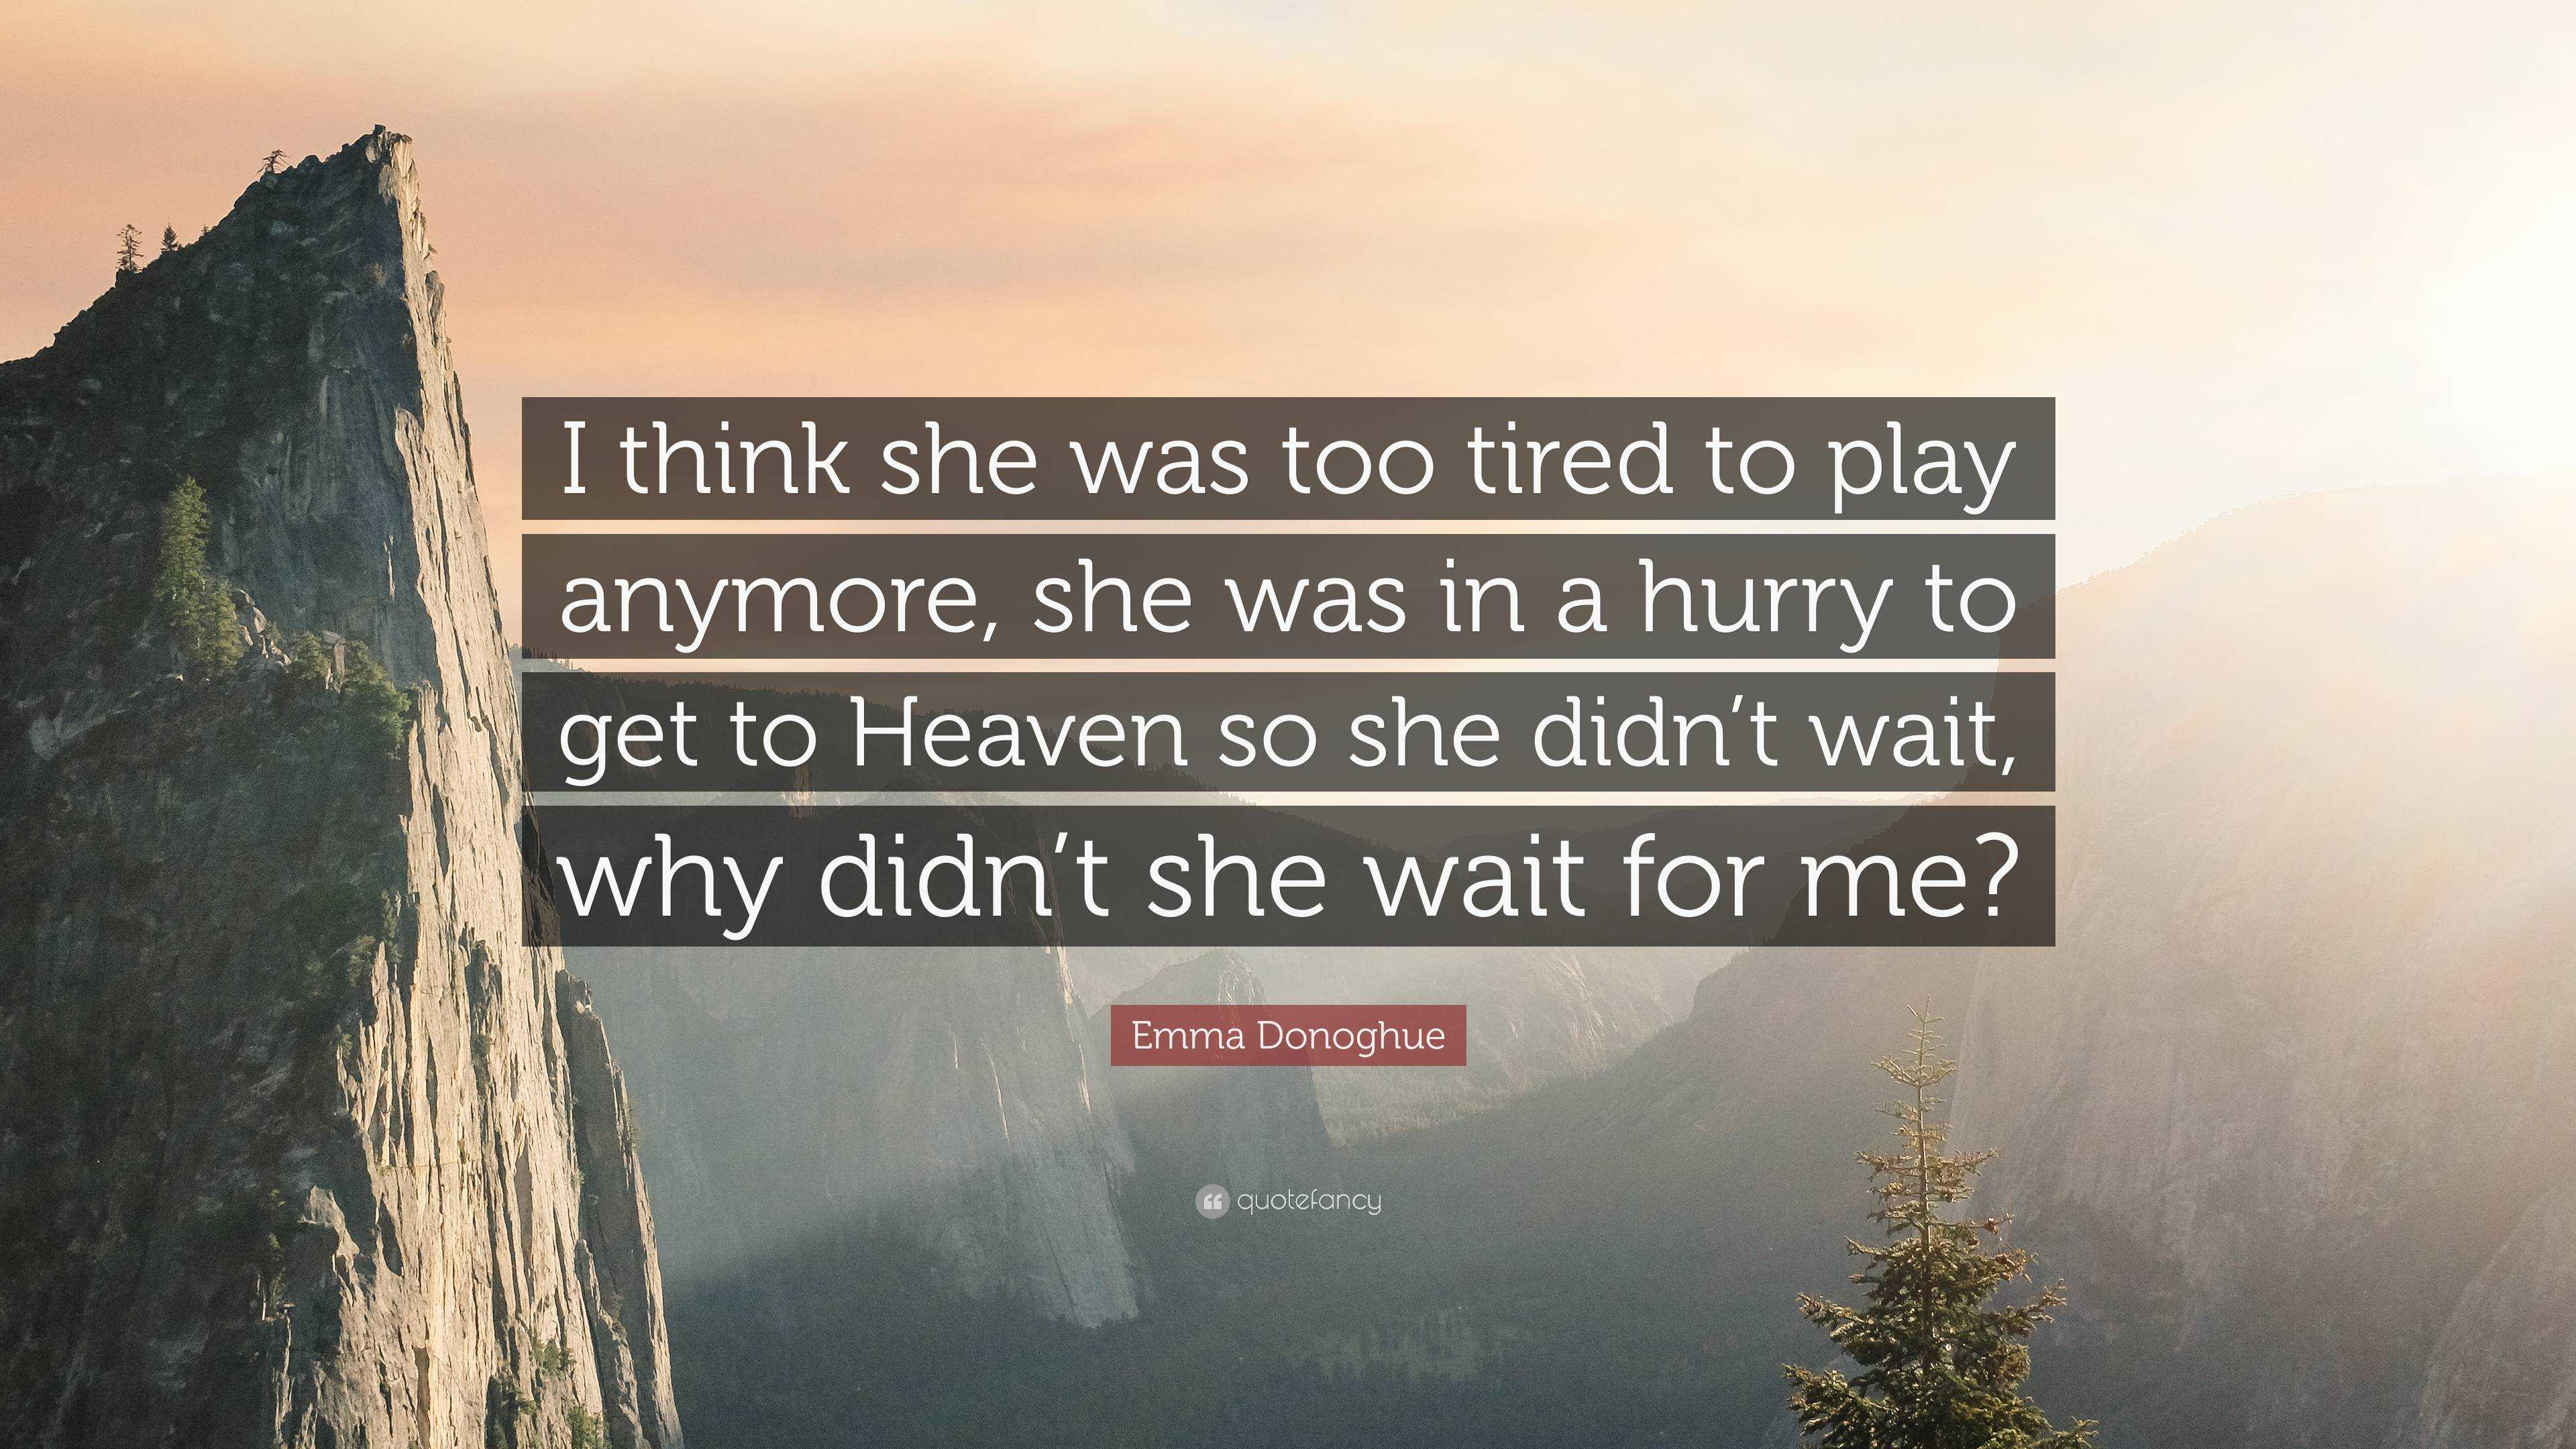 Emma Donoghue Quote: “I think she was too tired to play anymore, she ...